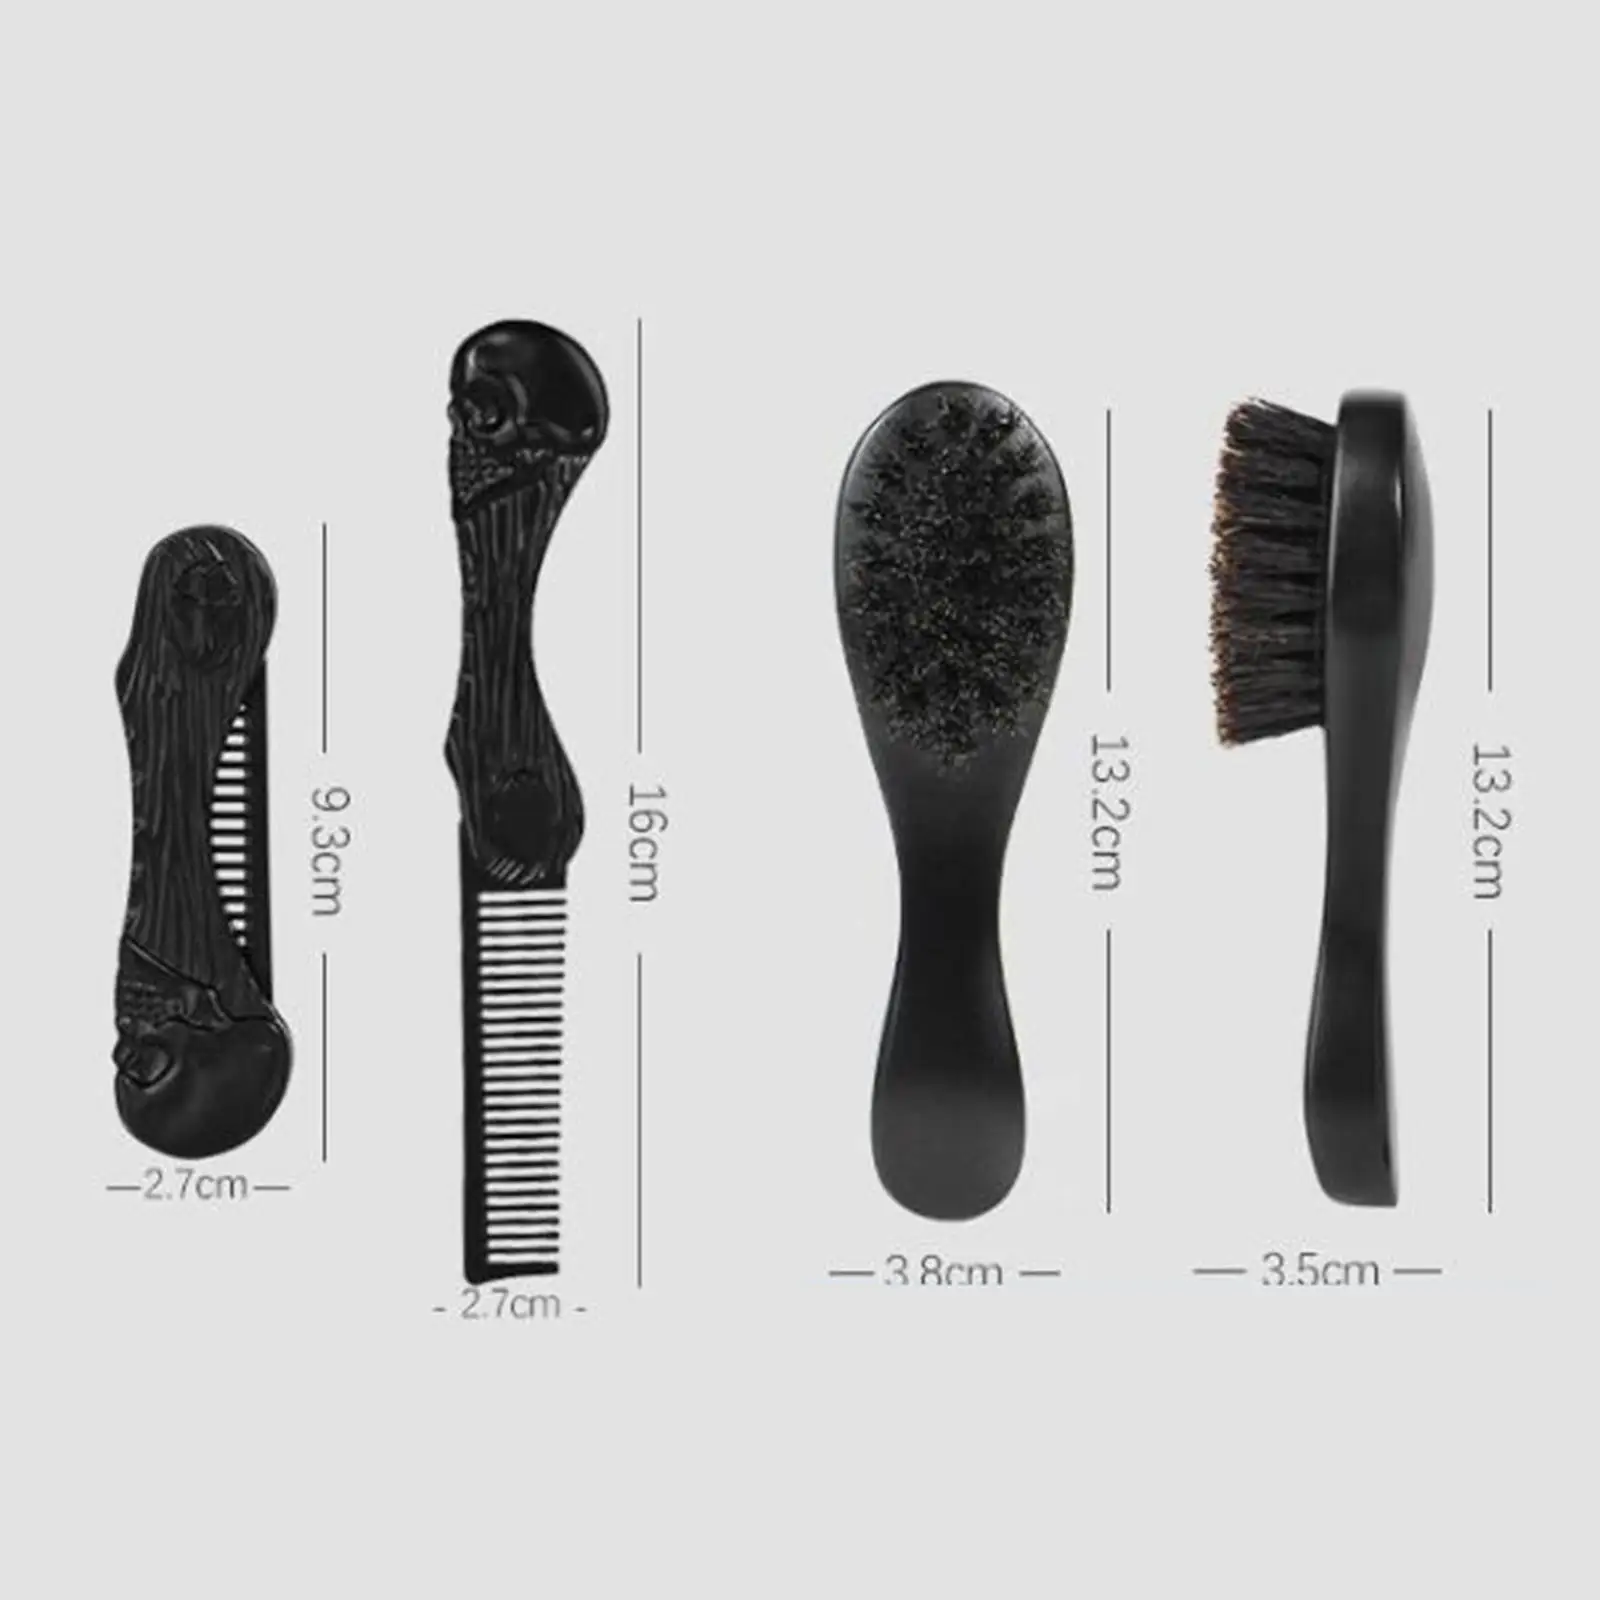 3 Pieces Professional Beard Care Kit Gift Folding Comb with Dustproof Bag for Men`s Cleaning Grooming Tool Beard Grooming Kit